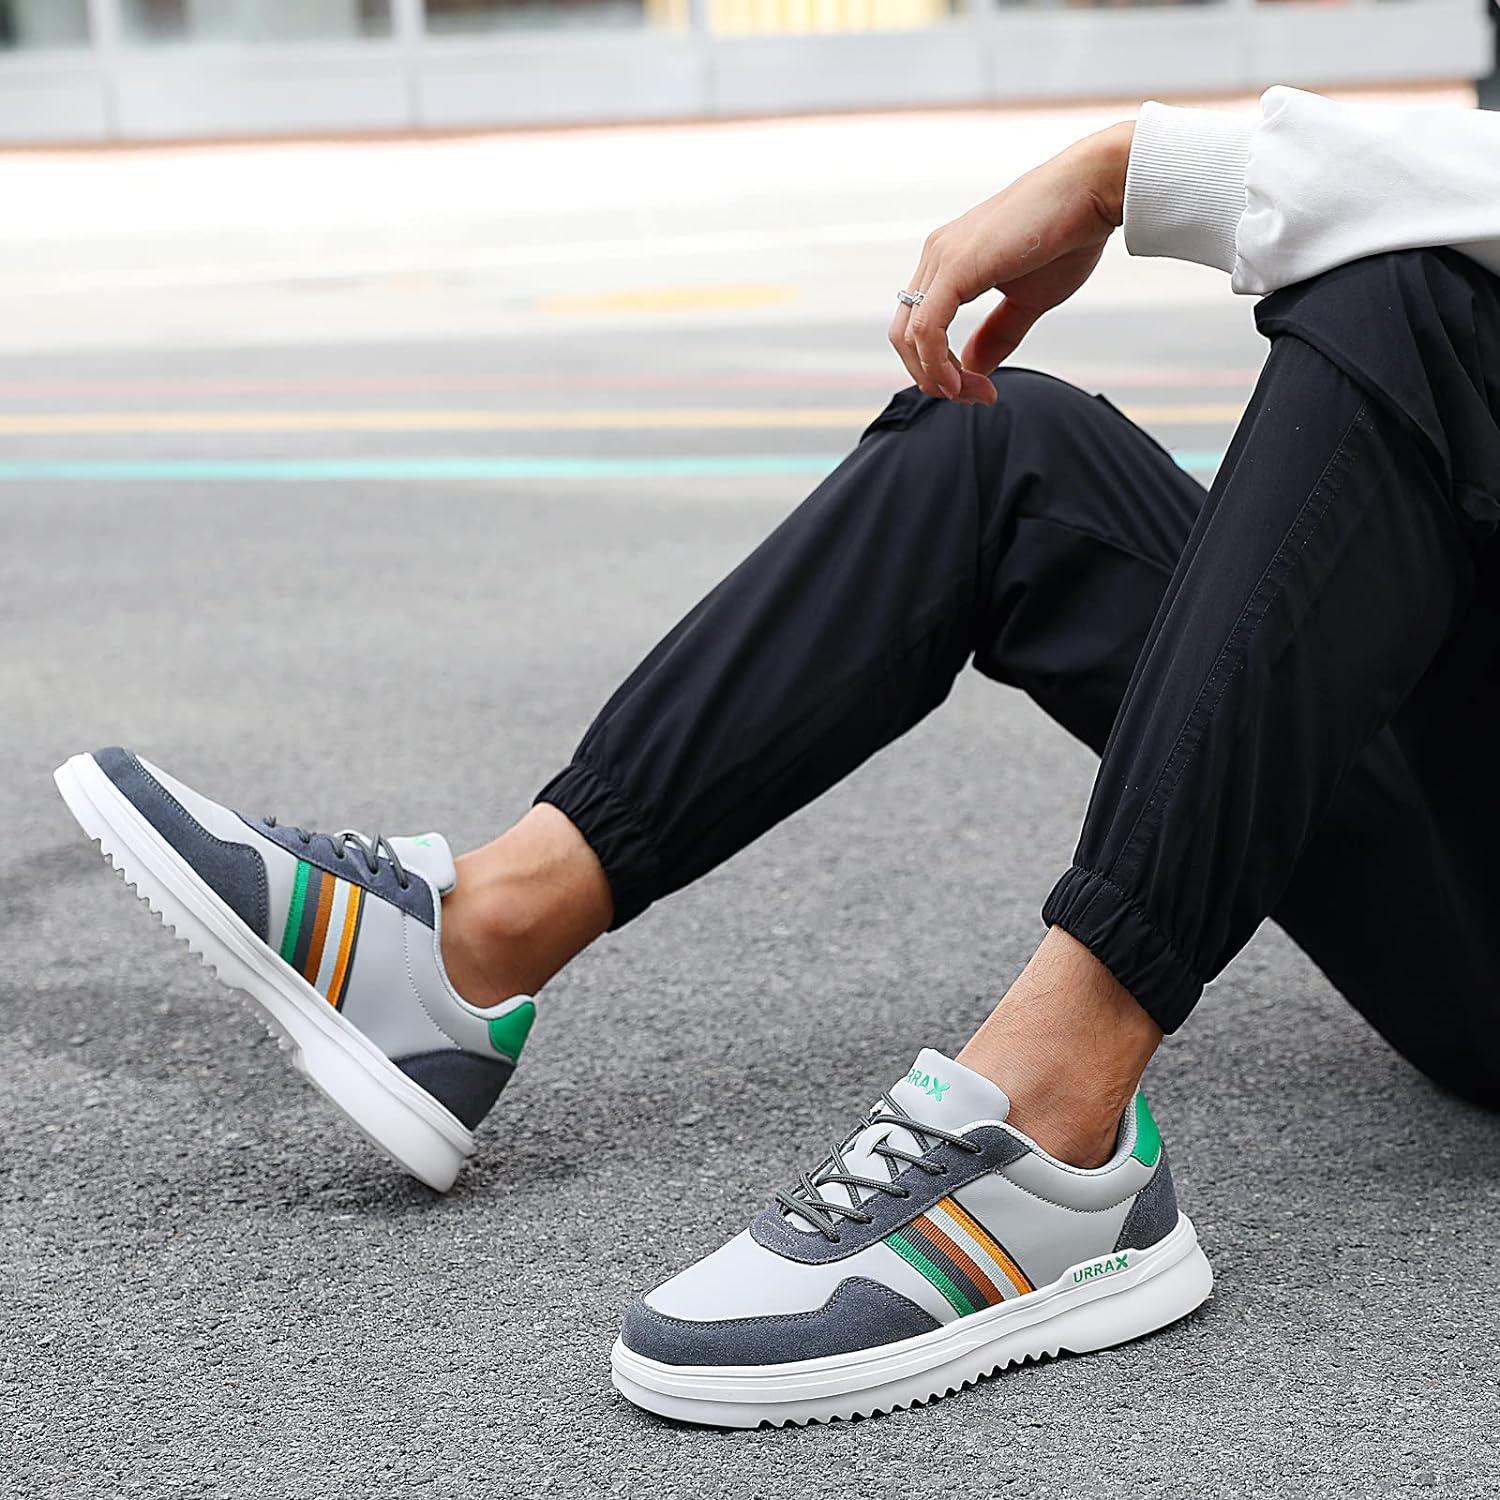 These Walking Sneakers Are Nurse-approved